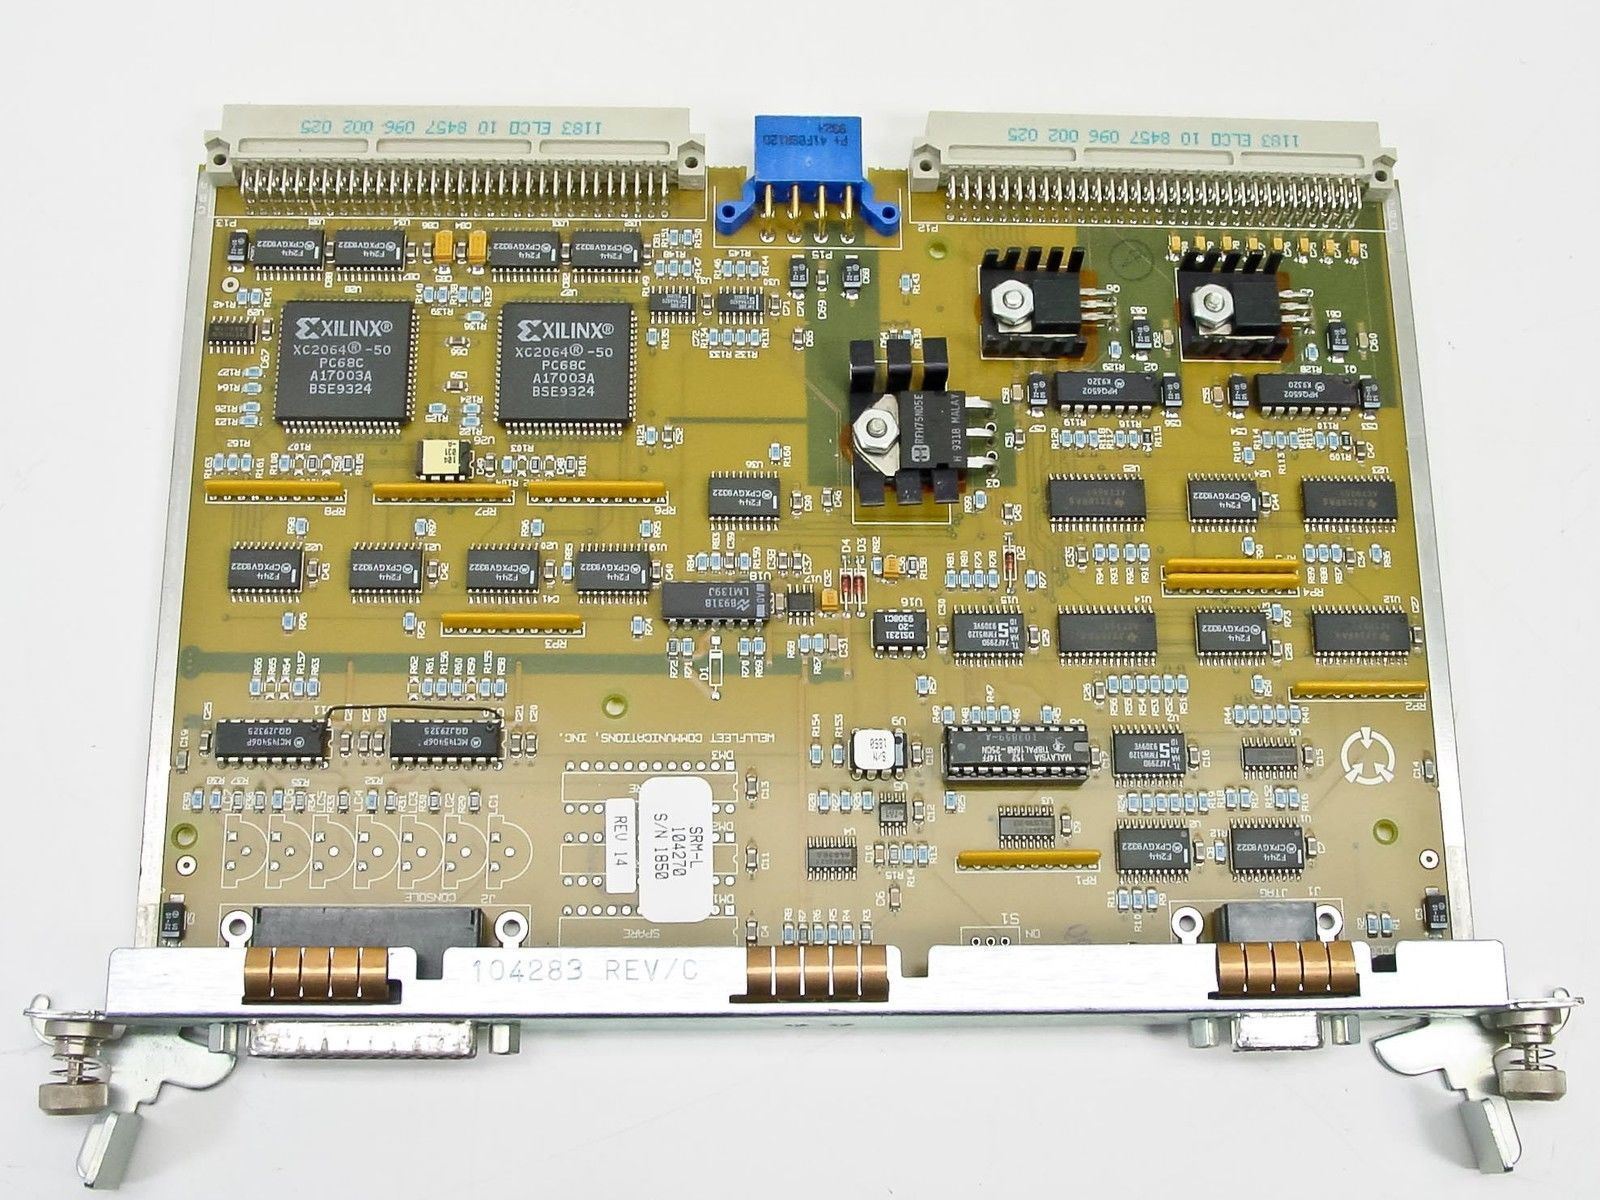 Bay Networks SRML 75000 System Resource Plug-In Module for Network Chassis